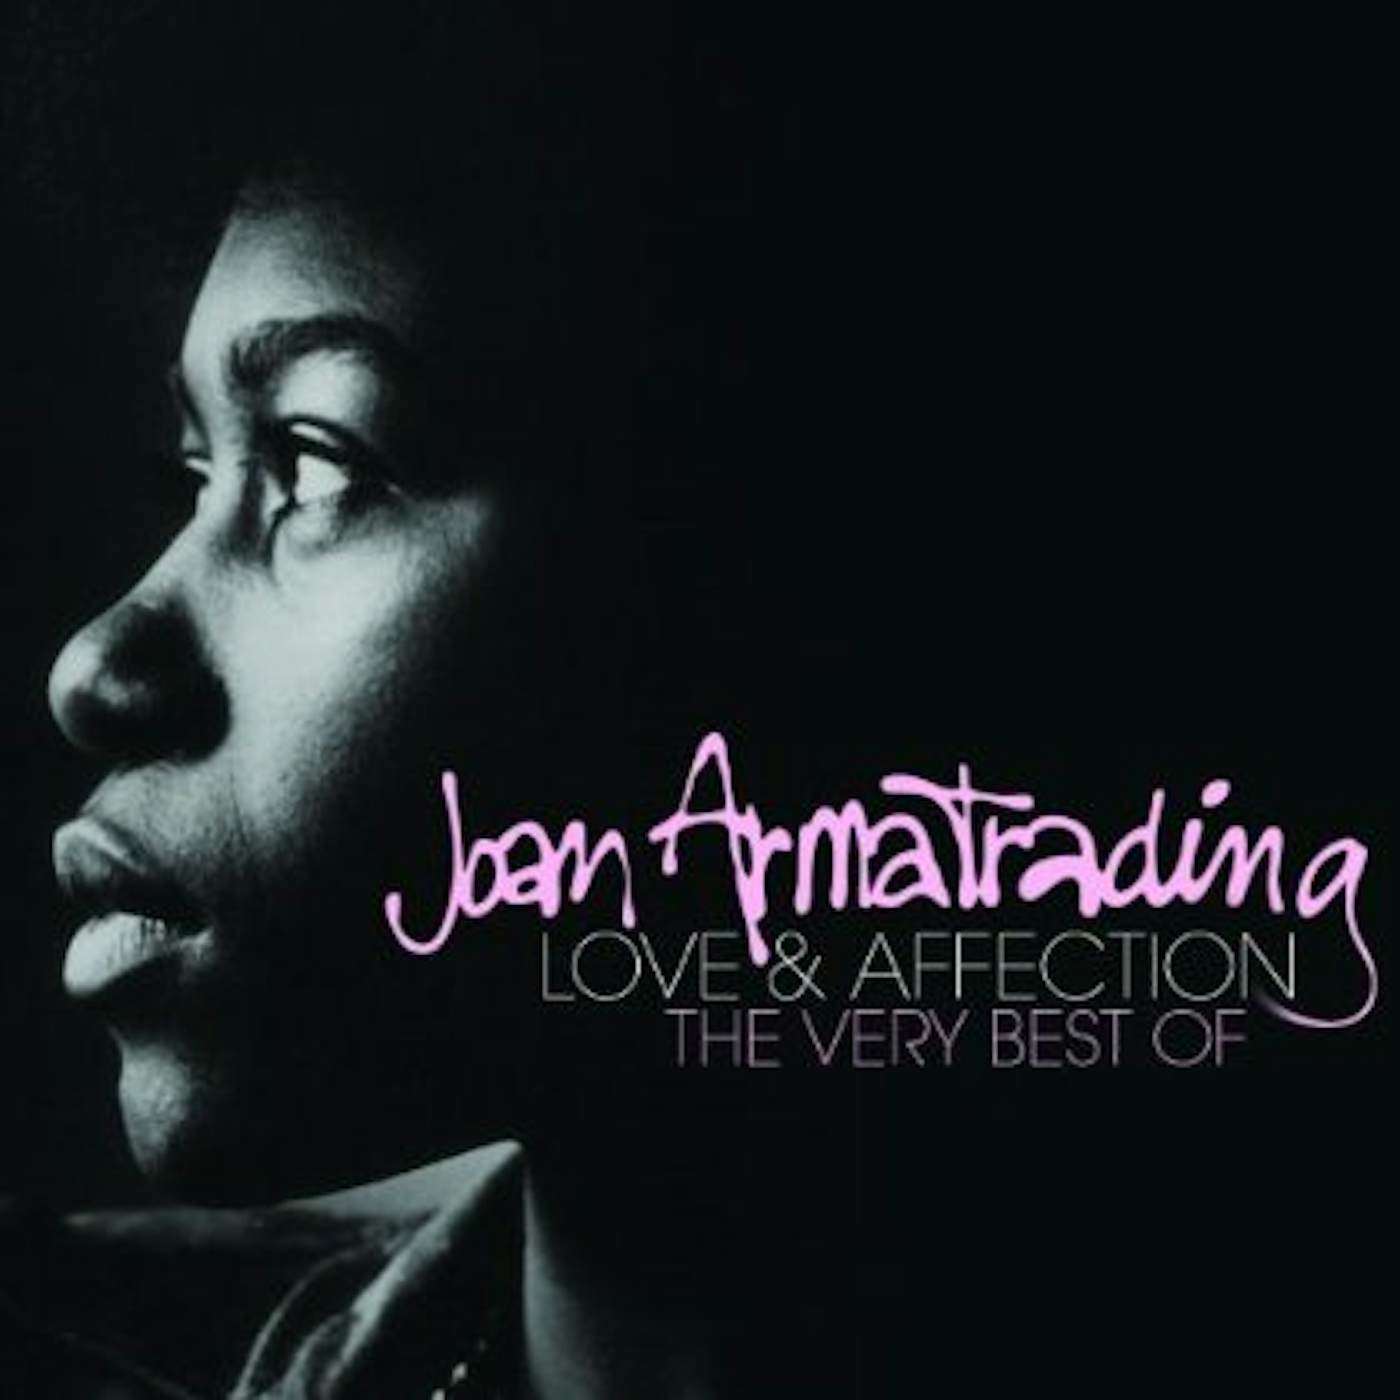 Joan Armatrading LOVE & AFFECTION: VERY BEST OF CD